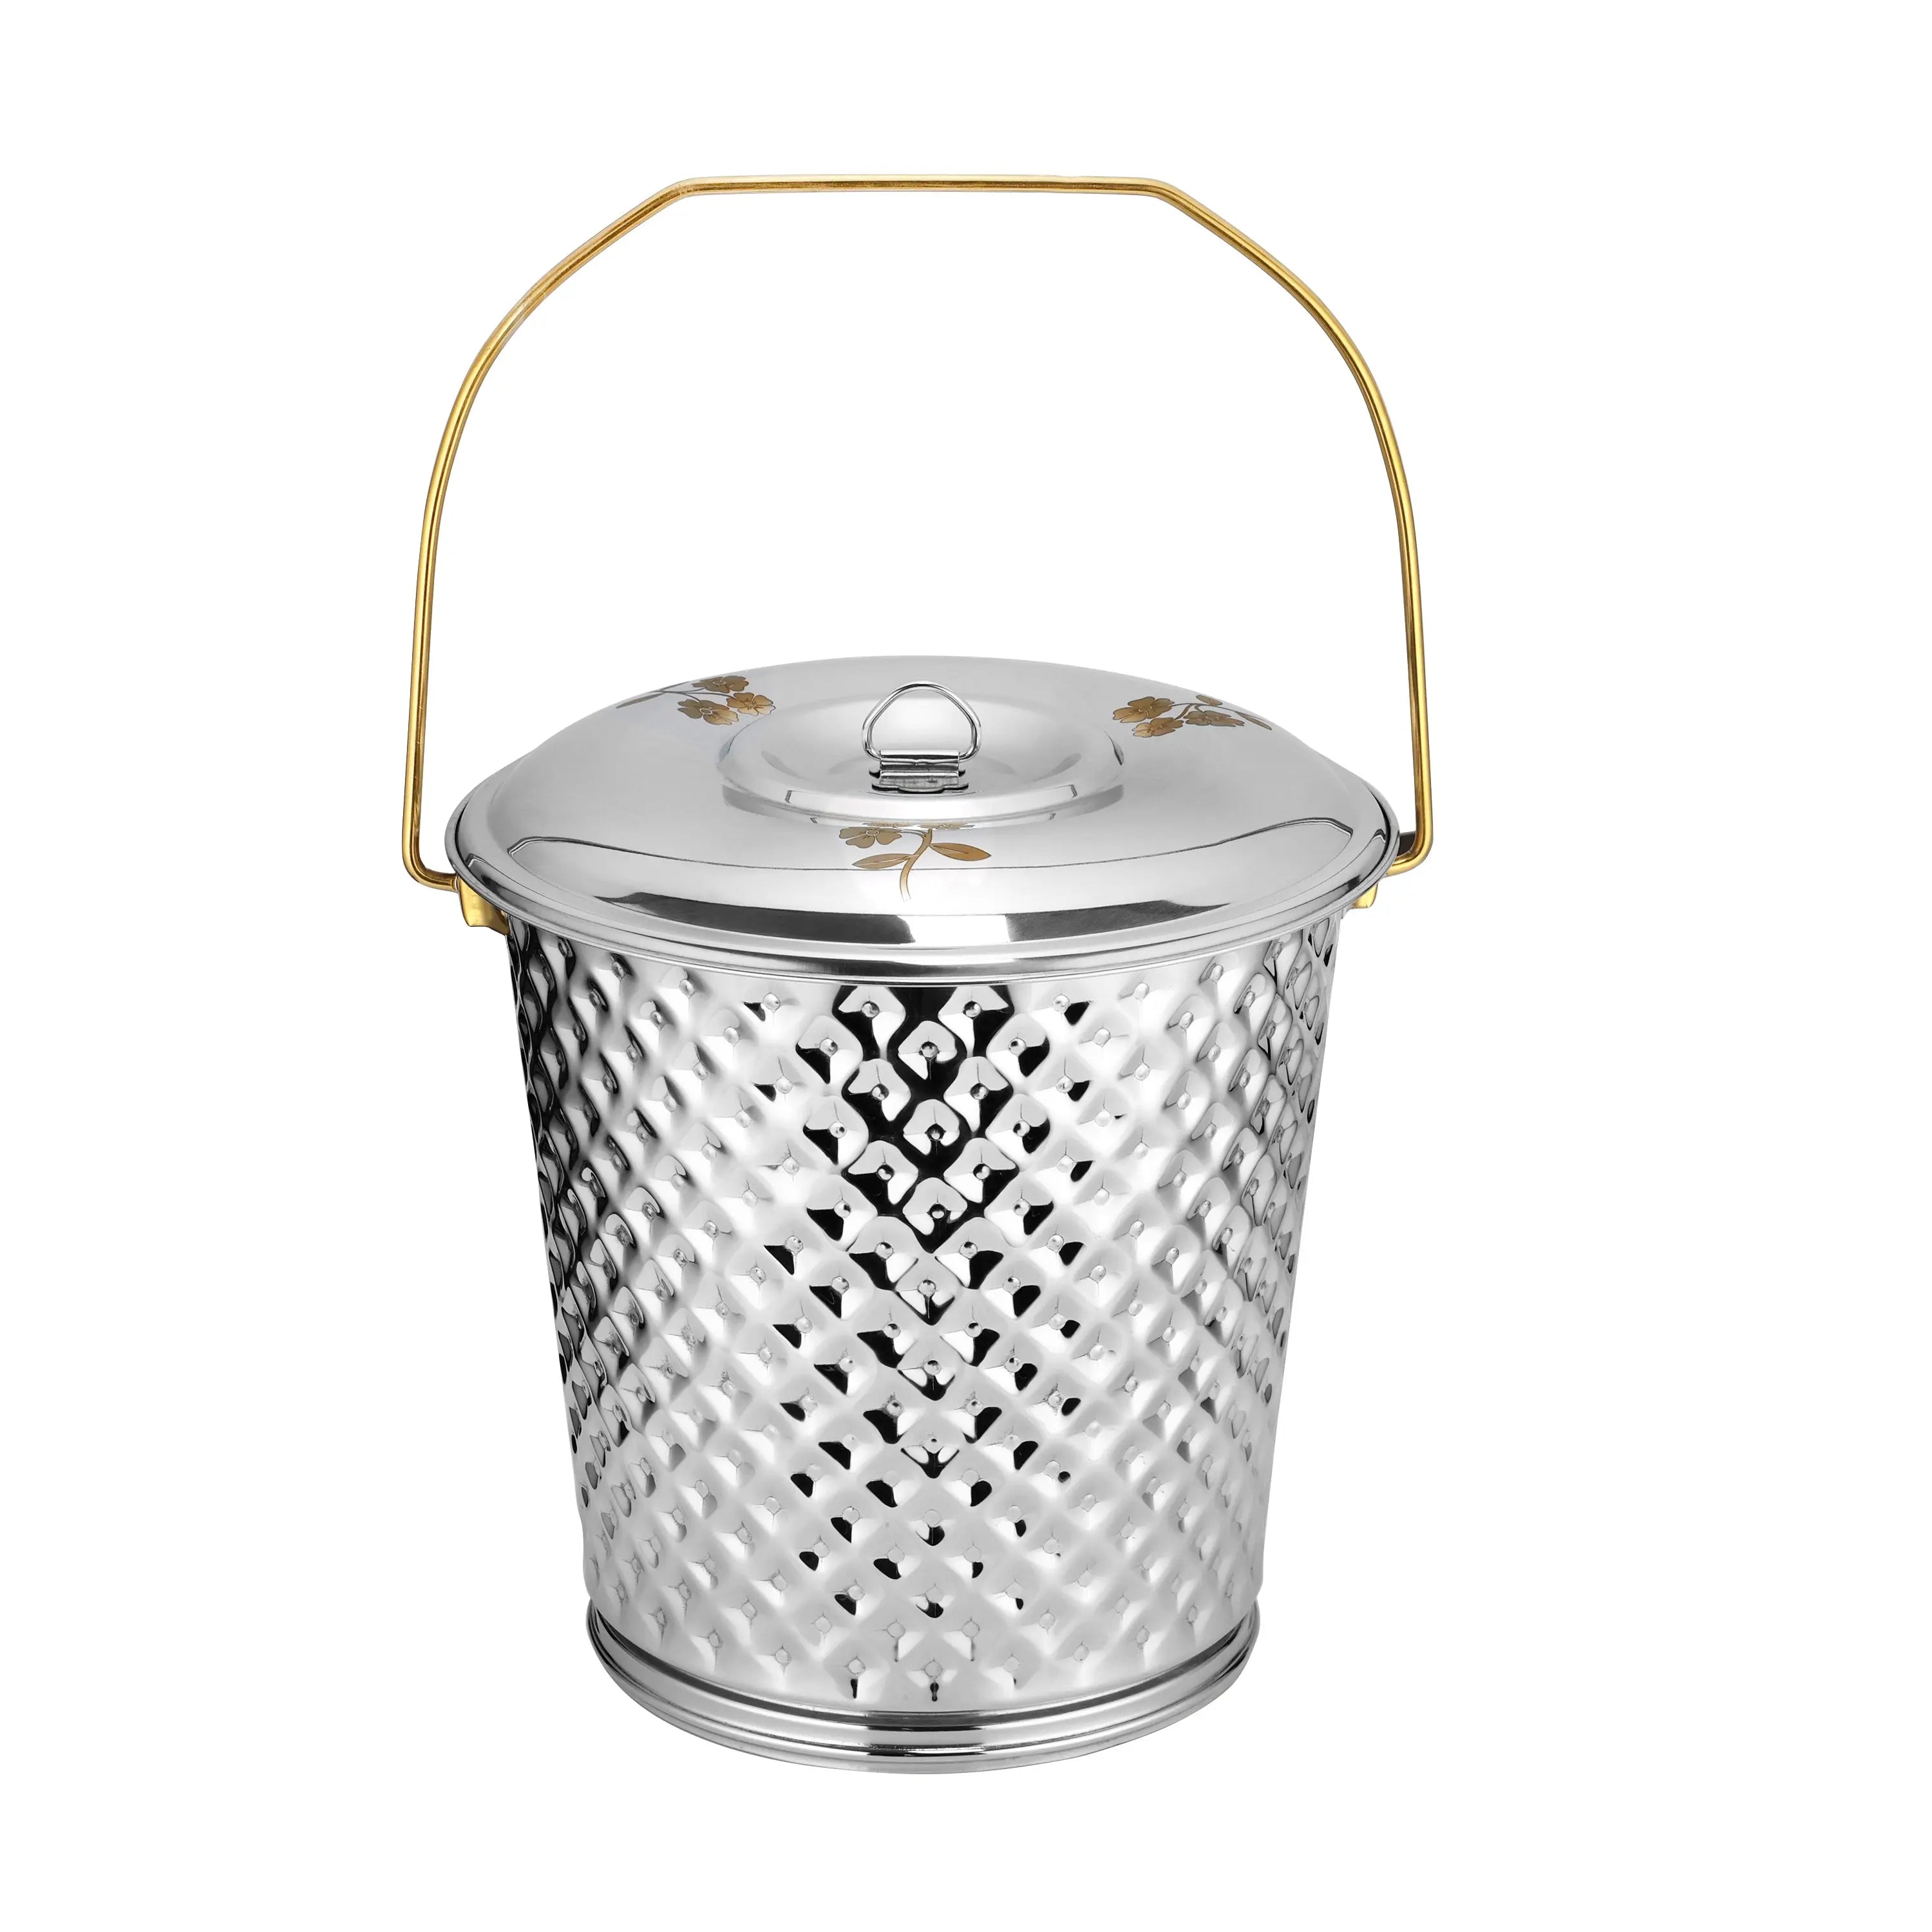 STAINLESS STEEL PVD GOLD DIAMOND BUCKET WITH LID - CROCKERY WALA AND COMPANY 